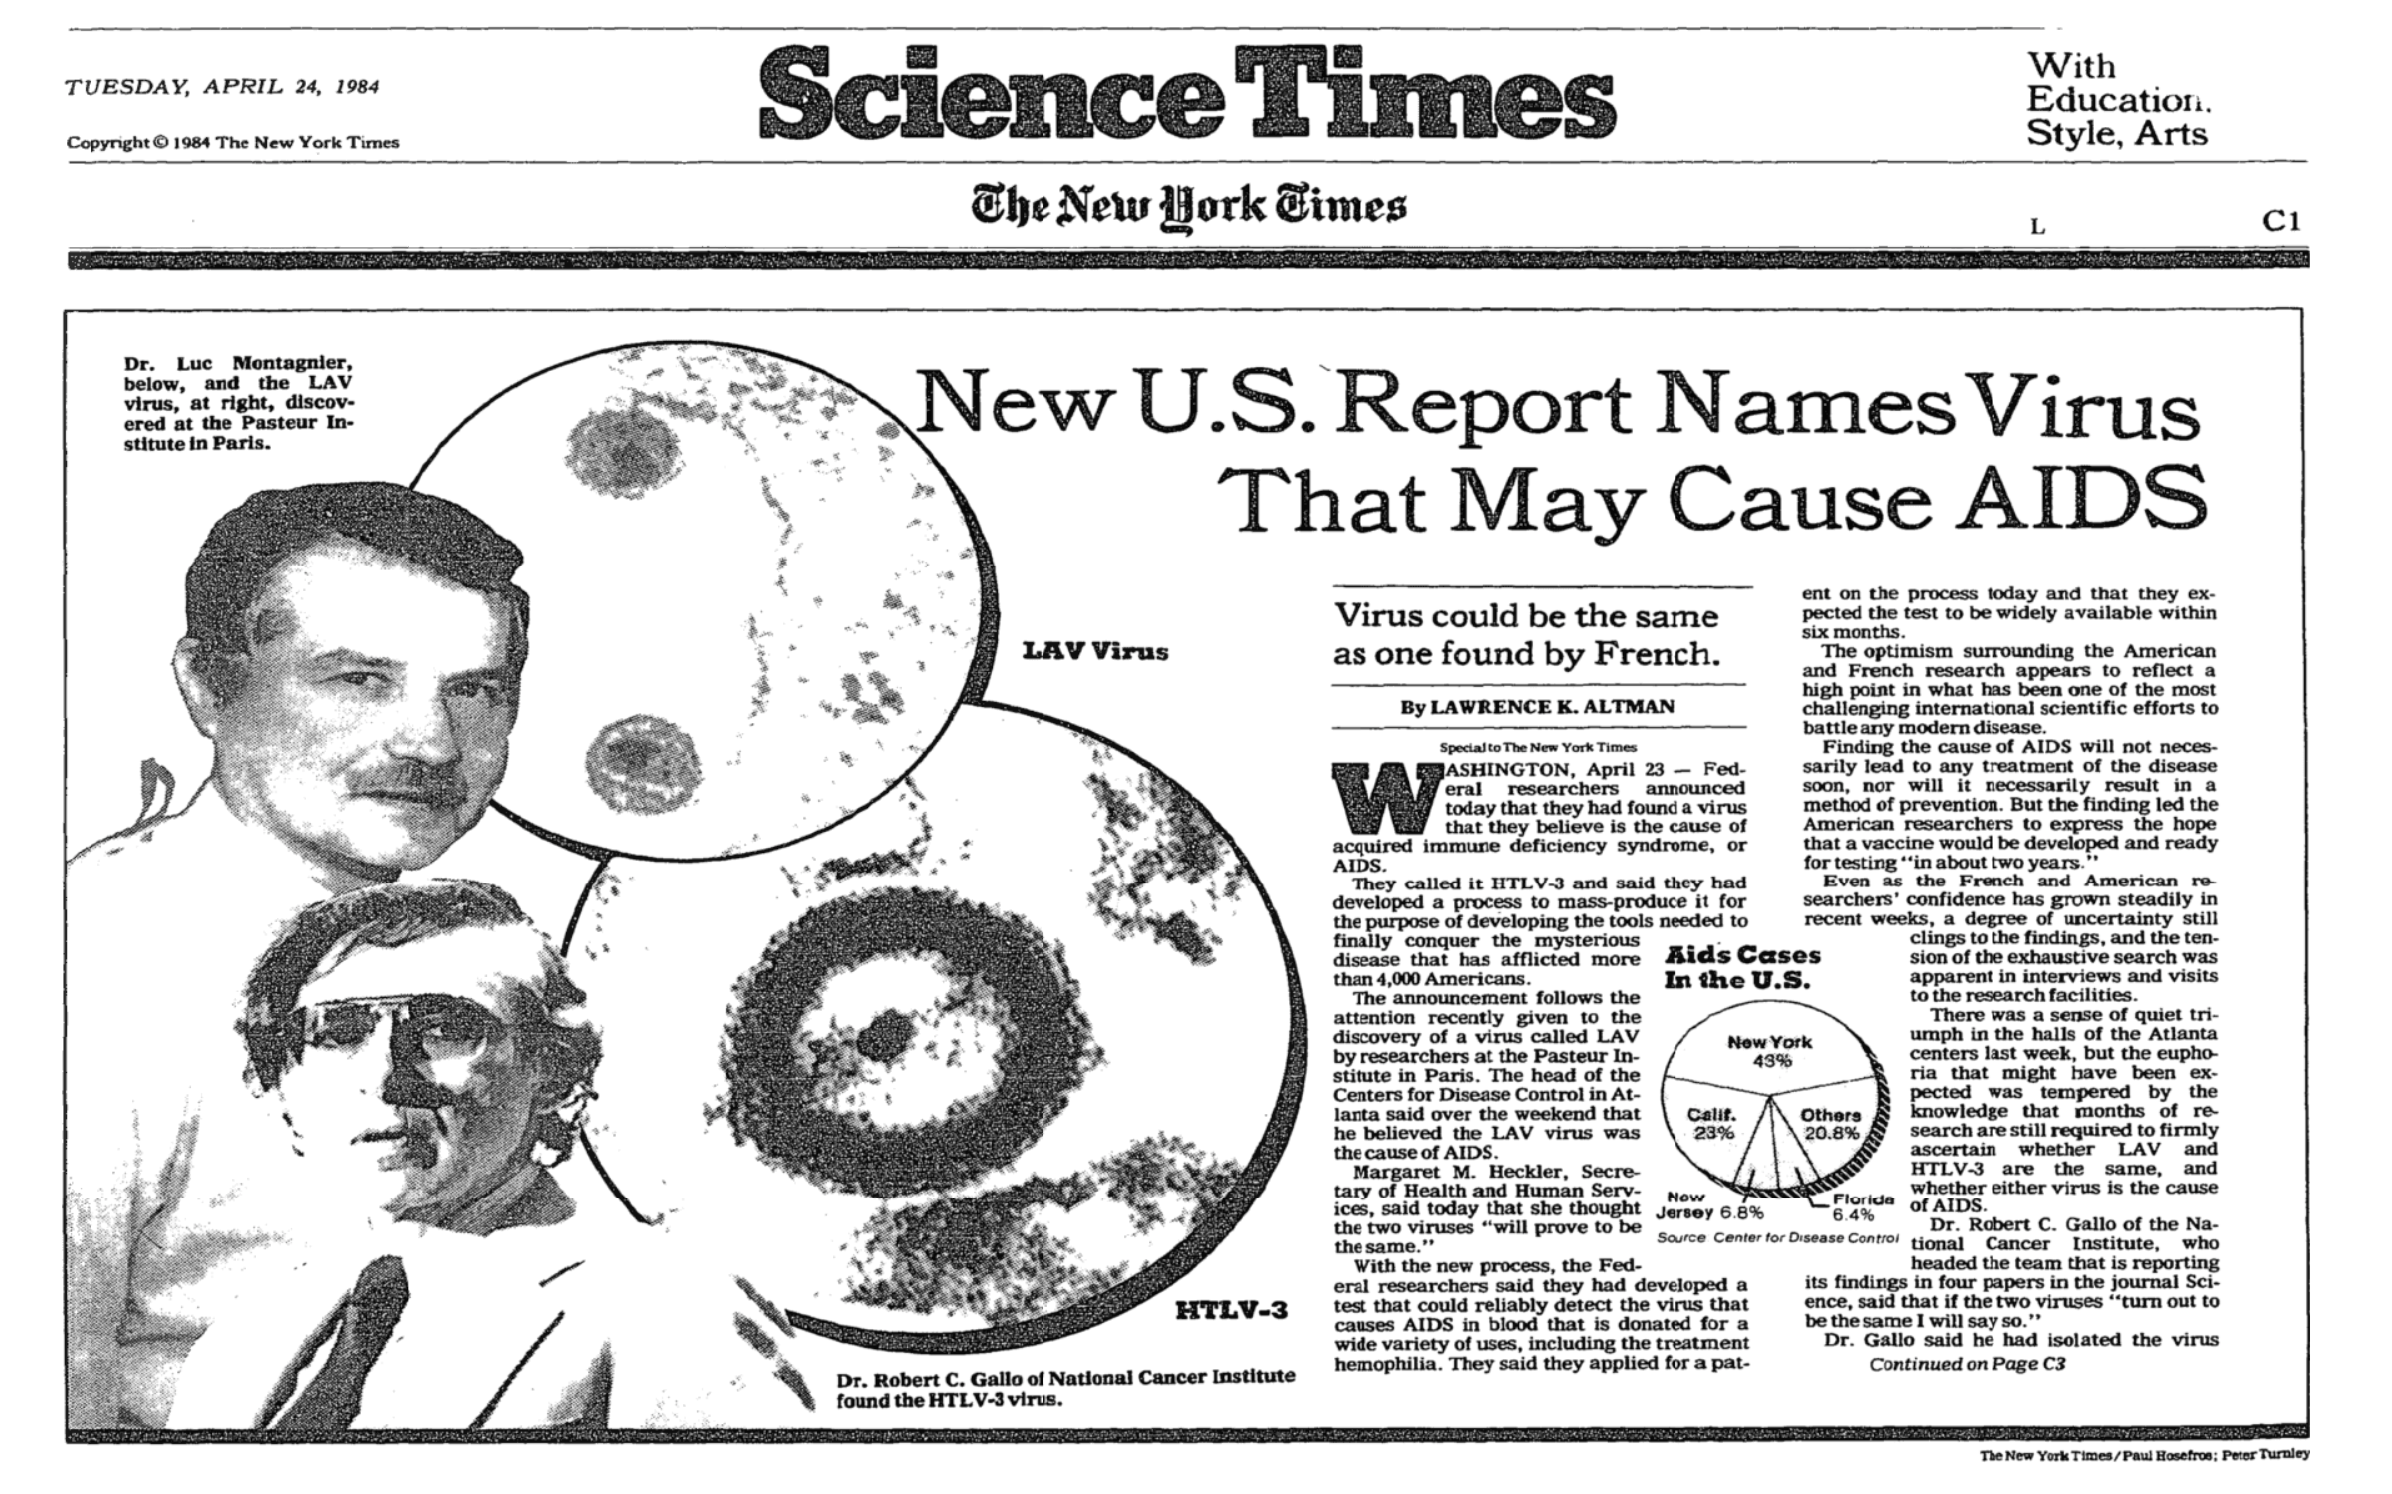 New York Times Article announcing American Health and Human Services researchers have found AIDS virus, 1984